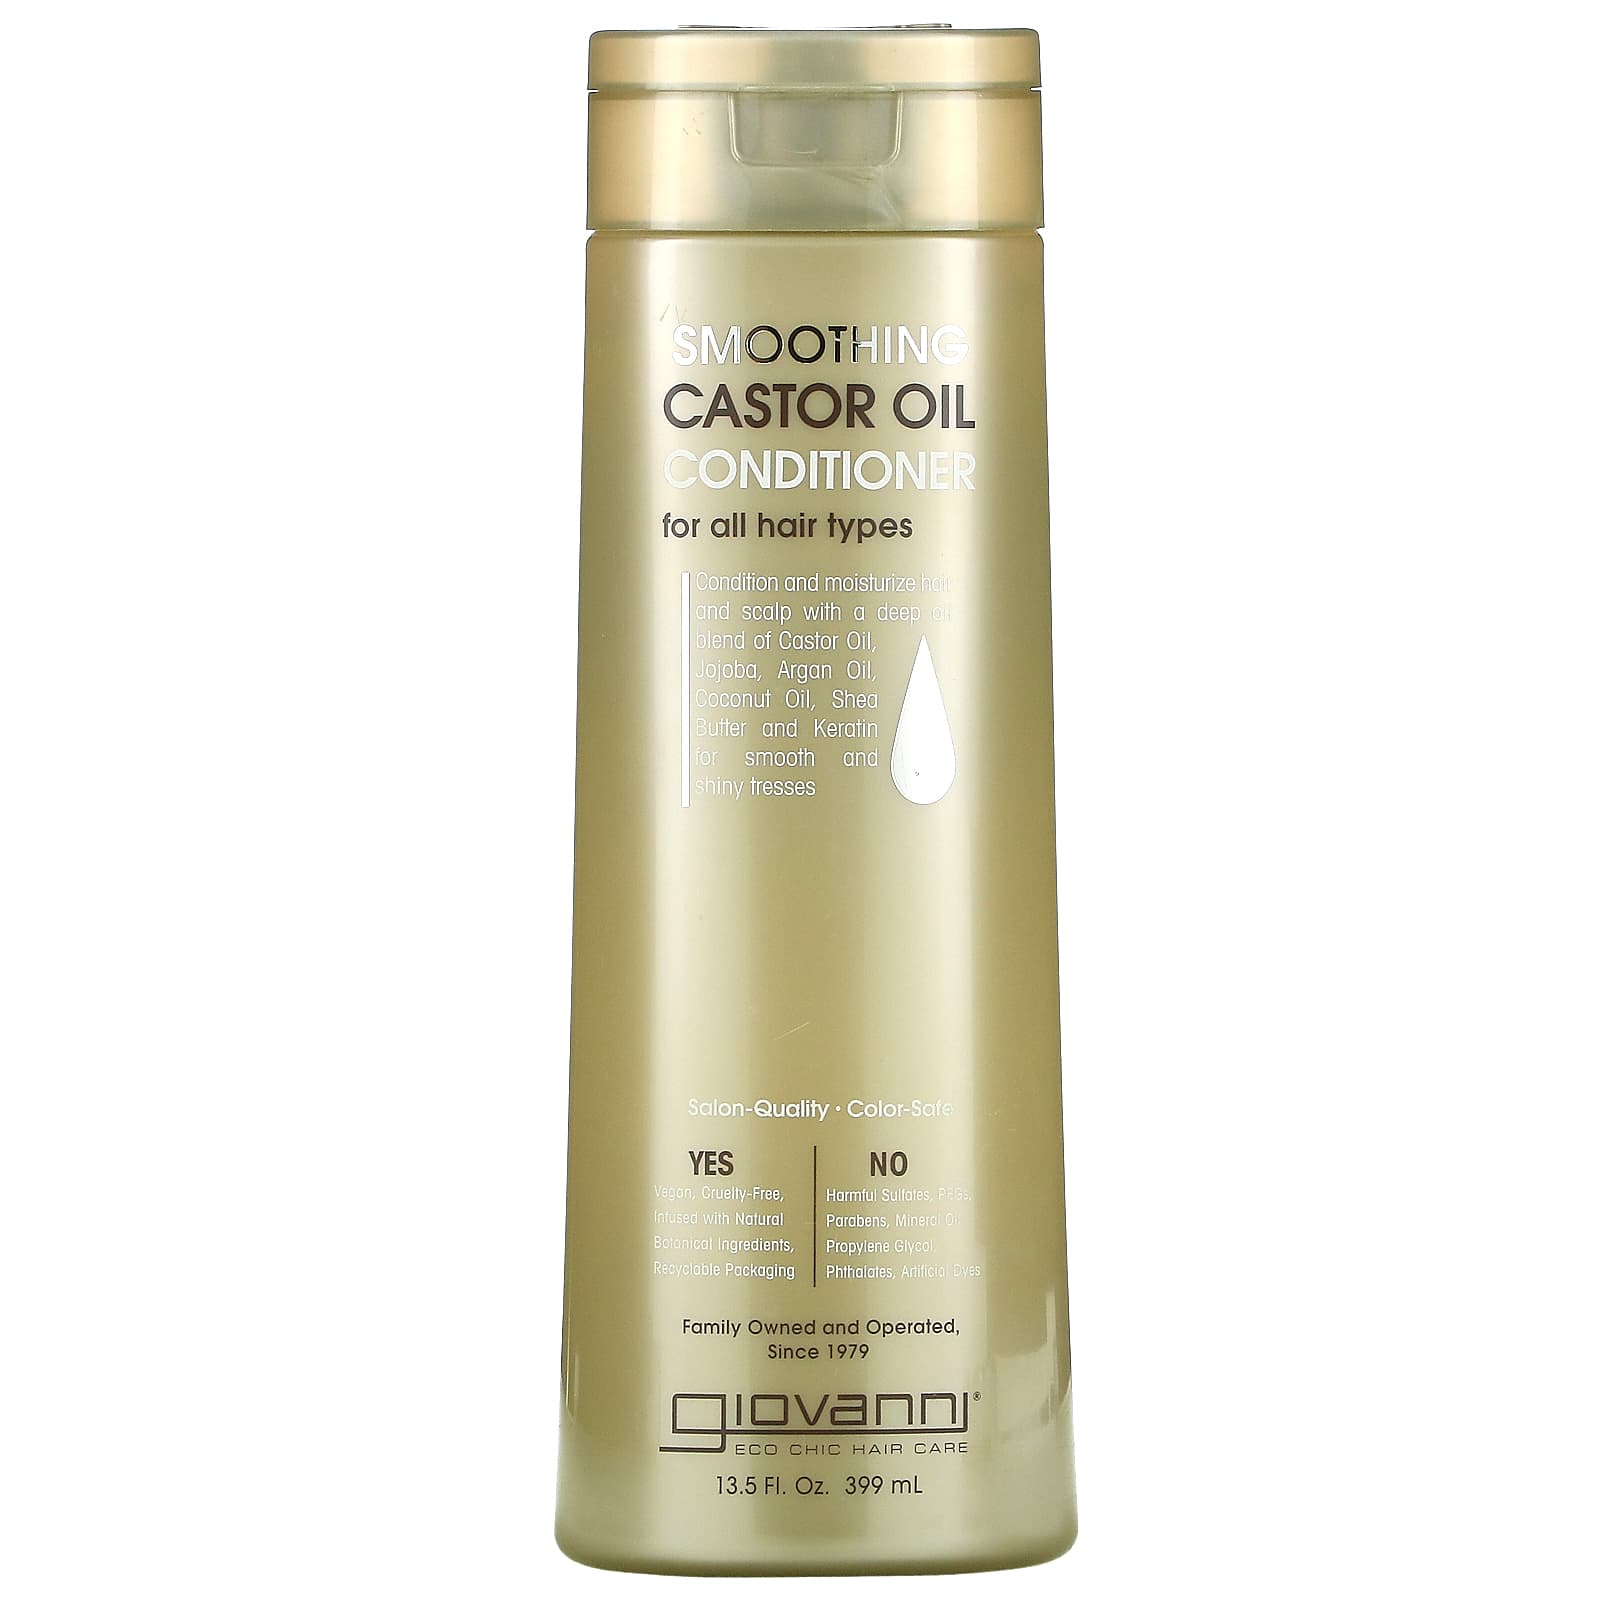 Giovanni, Smoothing Castor Oil Conditioner, For All Hair Types,  fl oz  (399 ml)